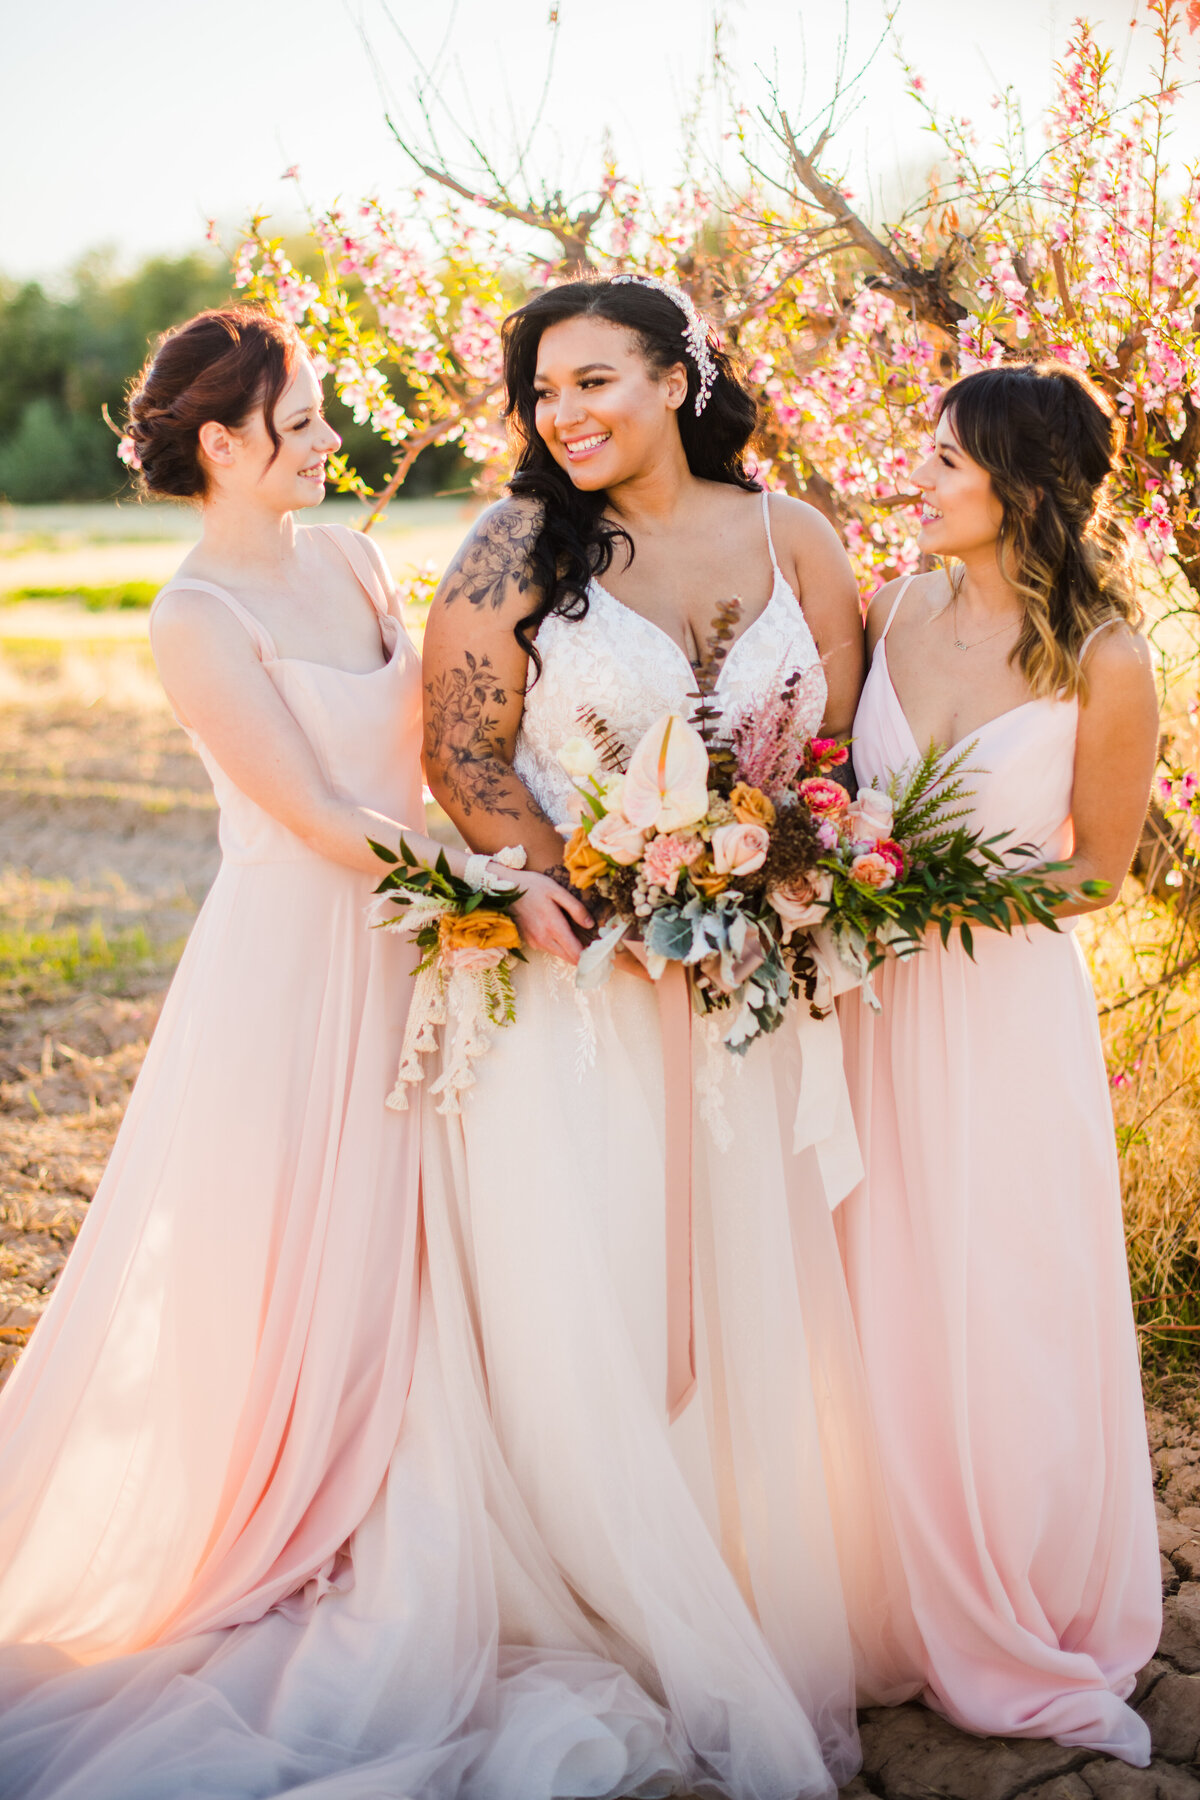 Bride with bridesmaids light pink dresses and bouquets smiling at each other cherry blossoms Schnepf Farms Meadows